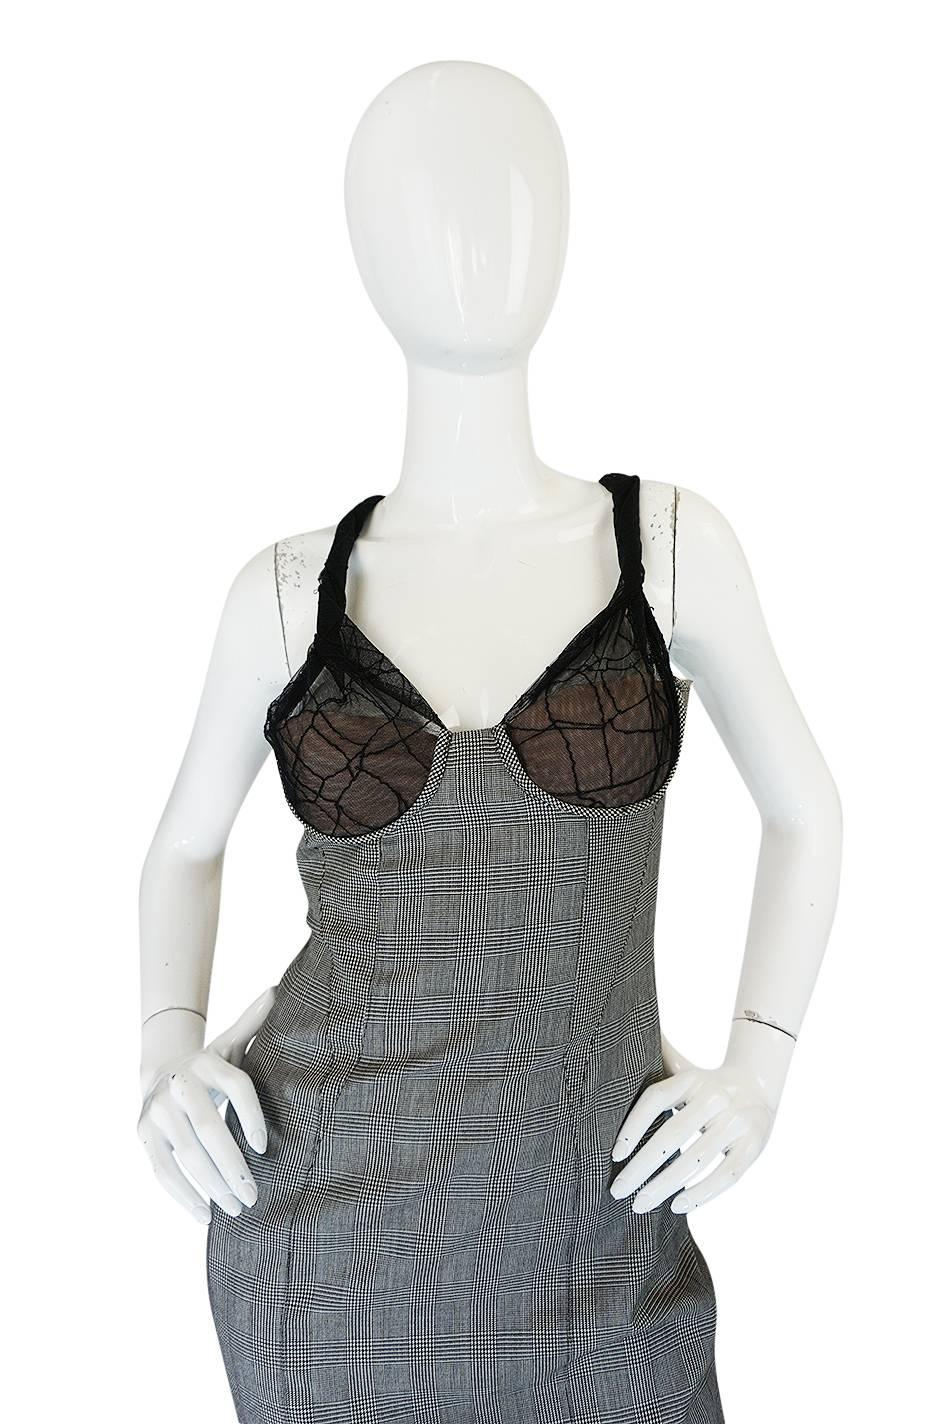 S/S 1998 Gianni Versace Couture Houndstooth Dress w Lace Cups In Excellent Condition In Rockwood, ON